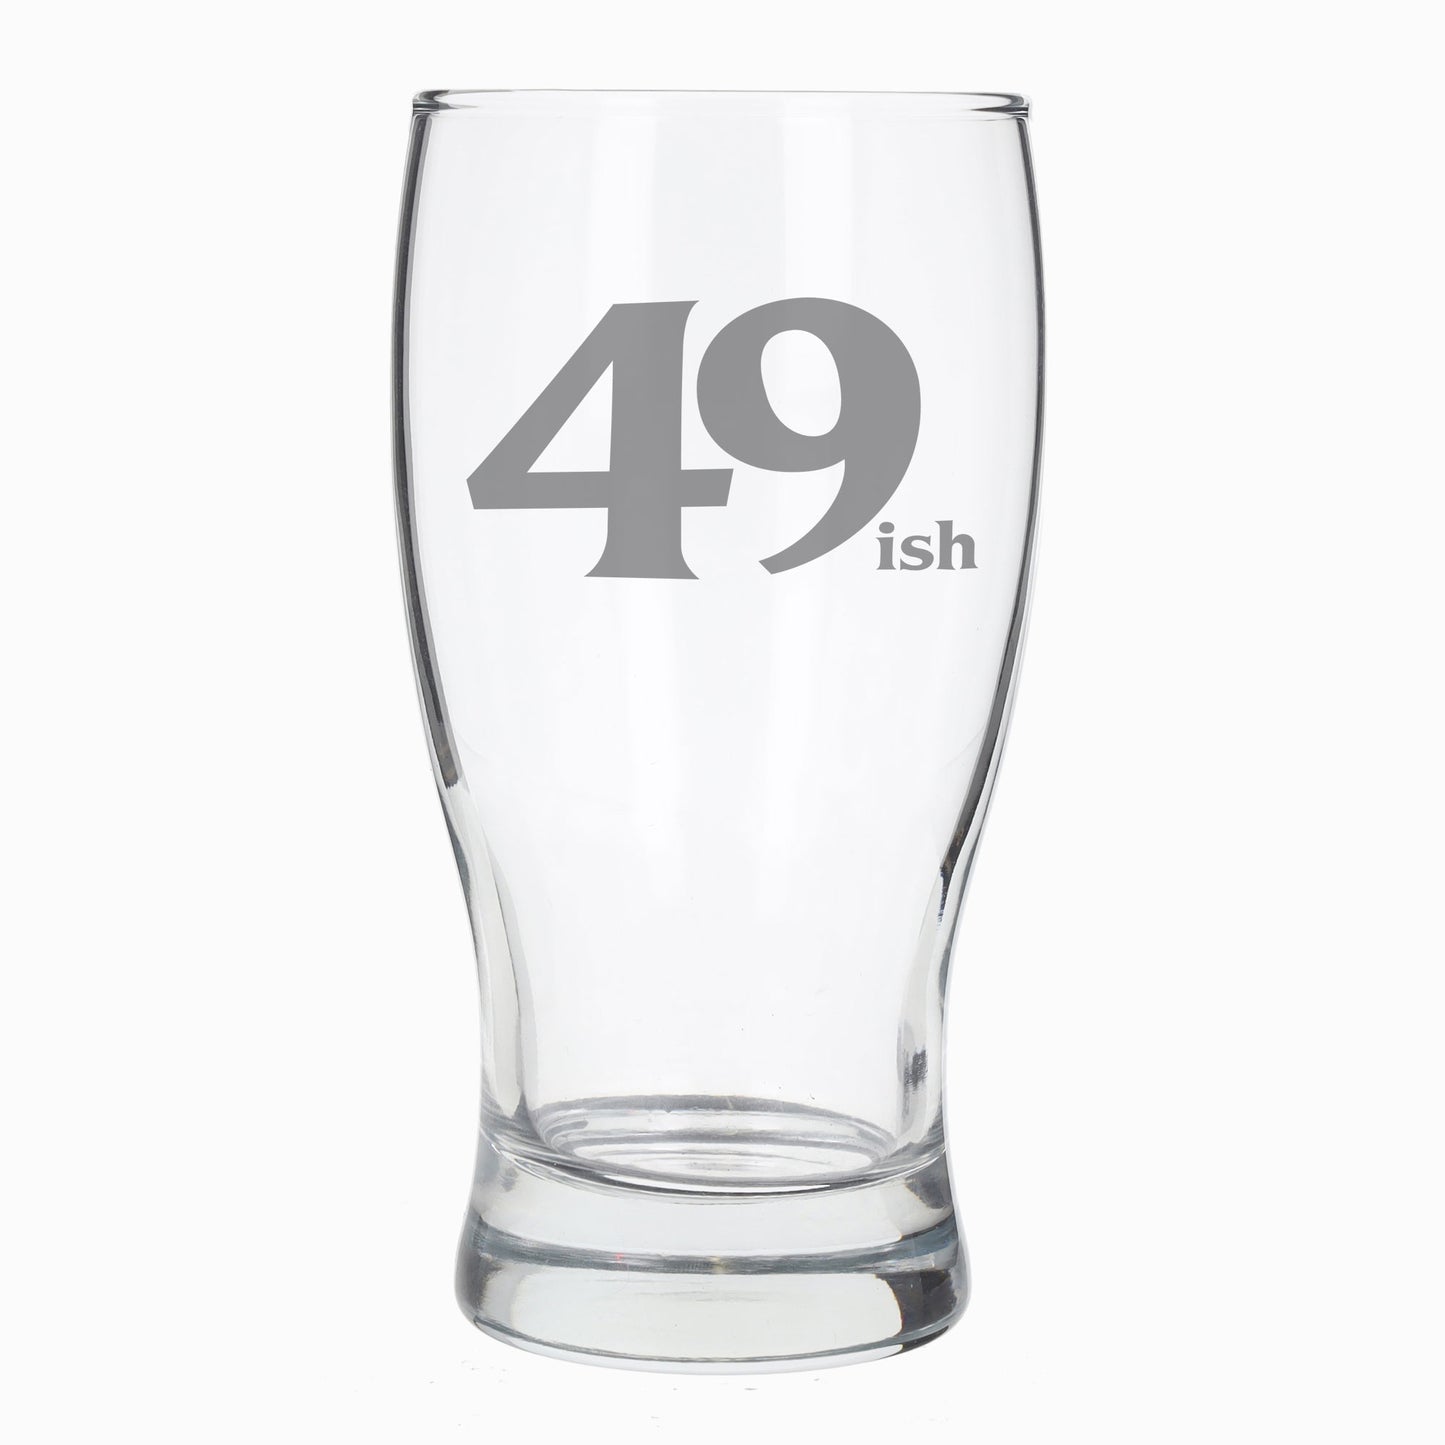 49ish Pint Glass and/or Coaster Set  - Always Looking Good - Pint Glass On Its Own  